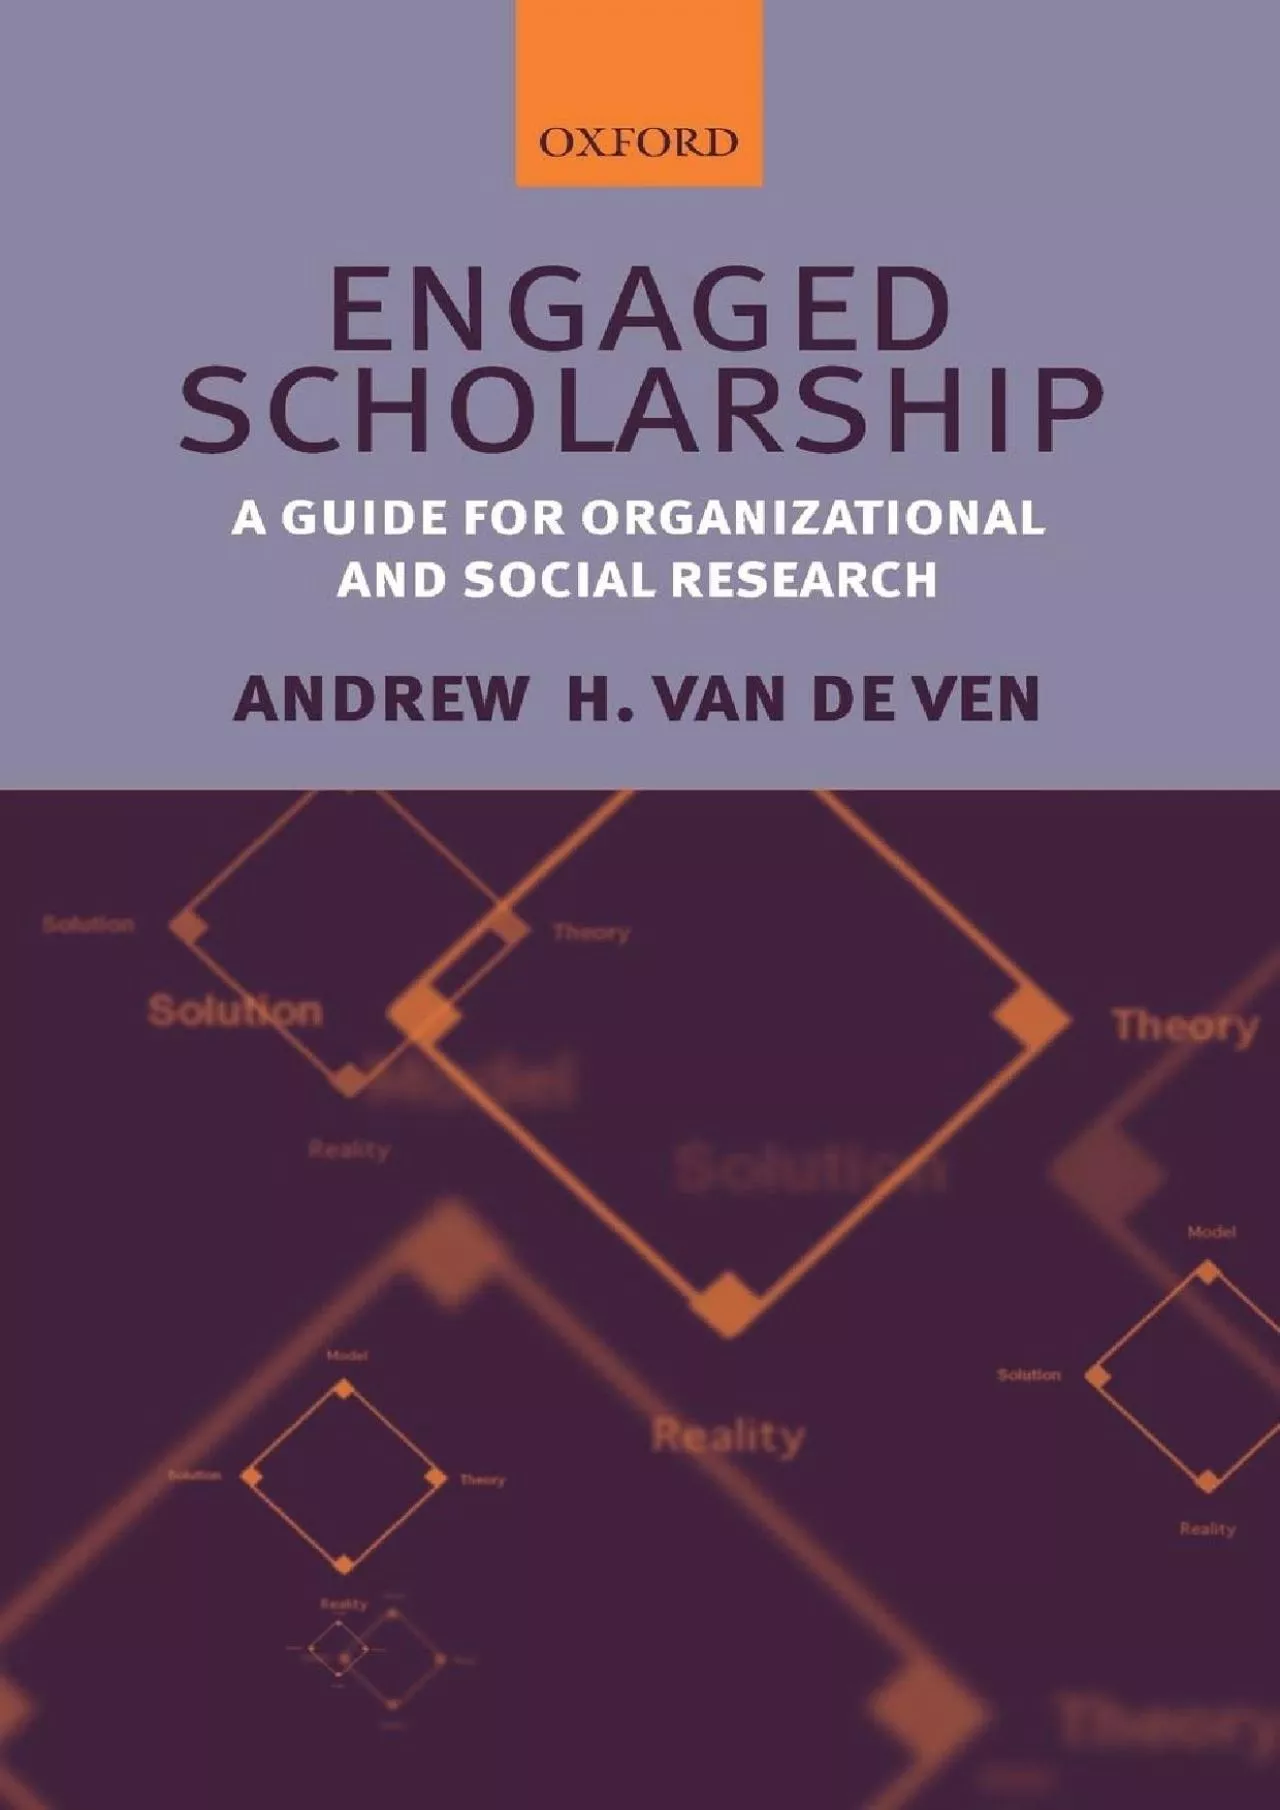 (DOWNLOAD)-Engaged Scholarship: A Guide for Organizational and Social Research